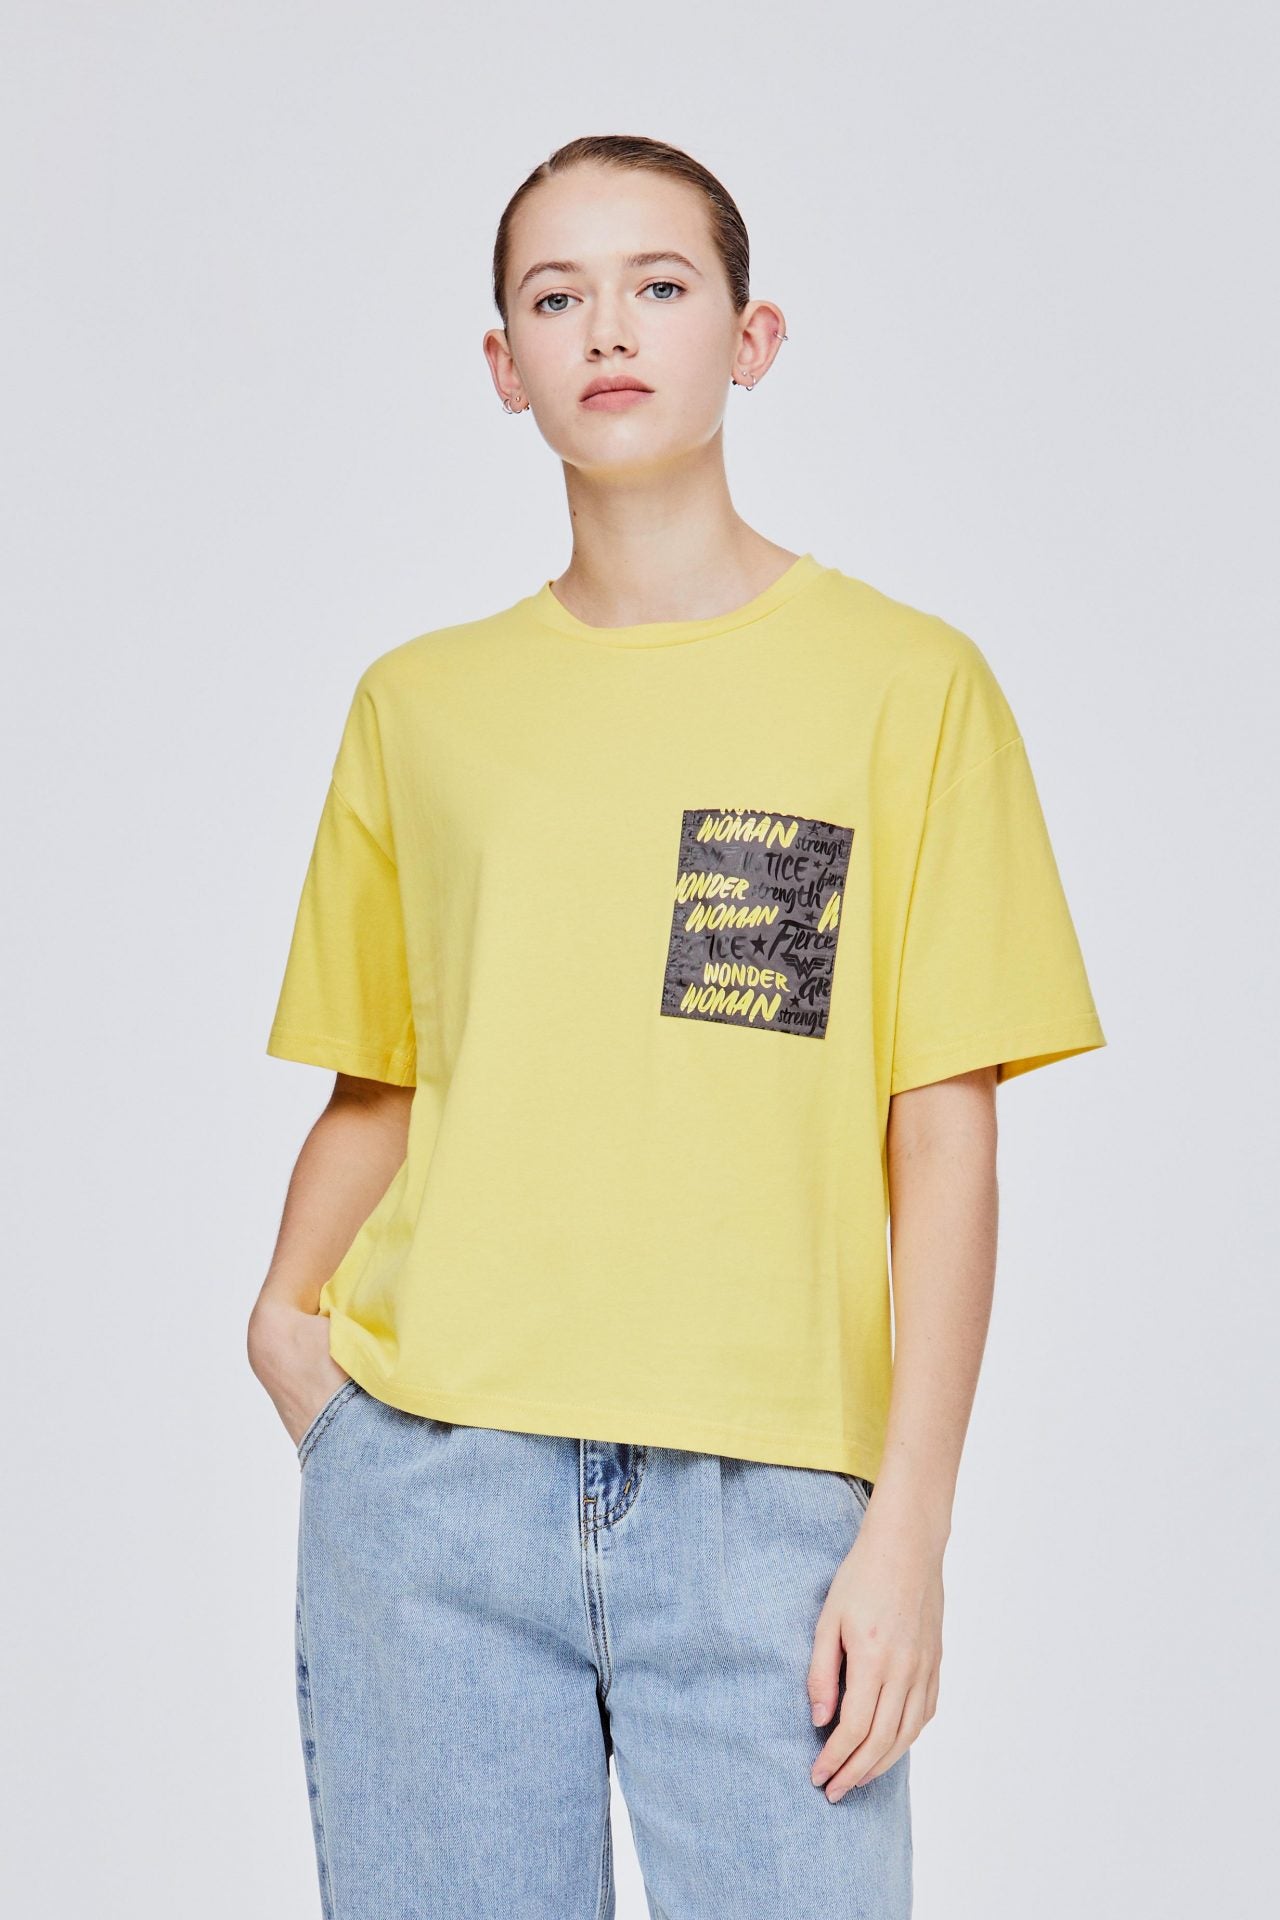 BT 11591 PRINTED GRAPHIC ON POCKET TEE YELLOW